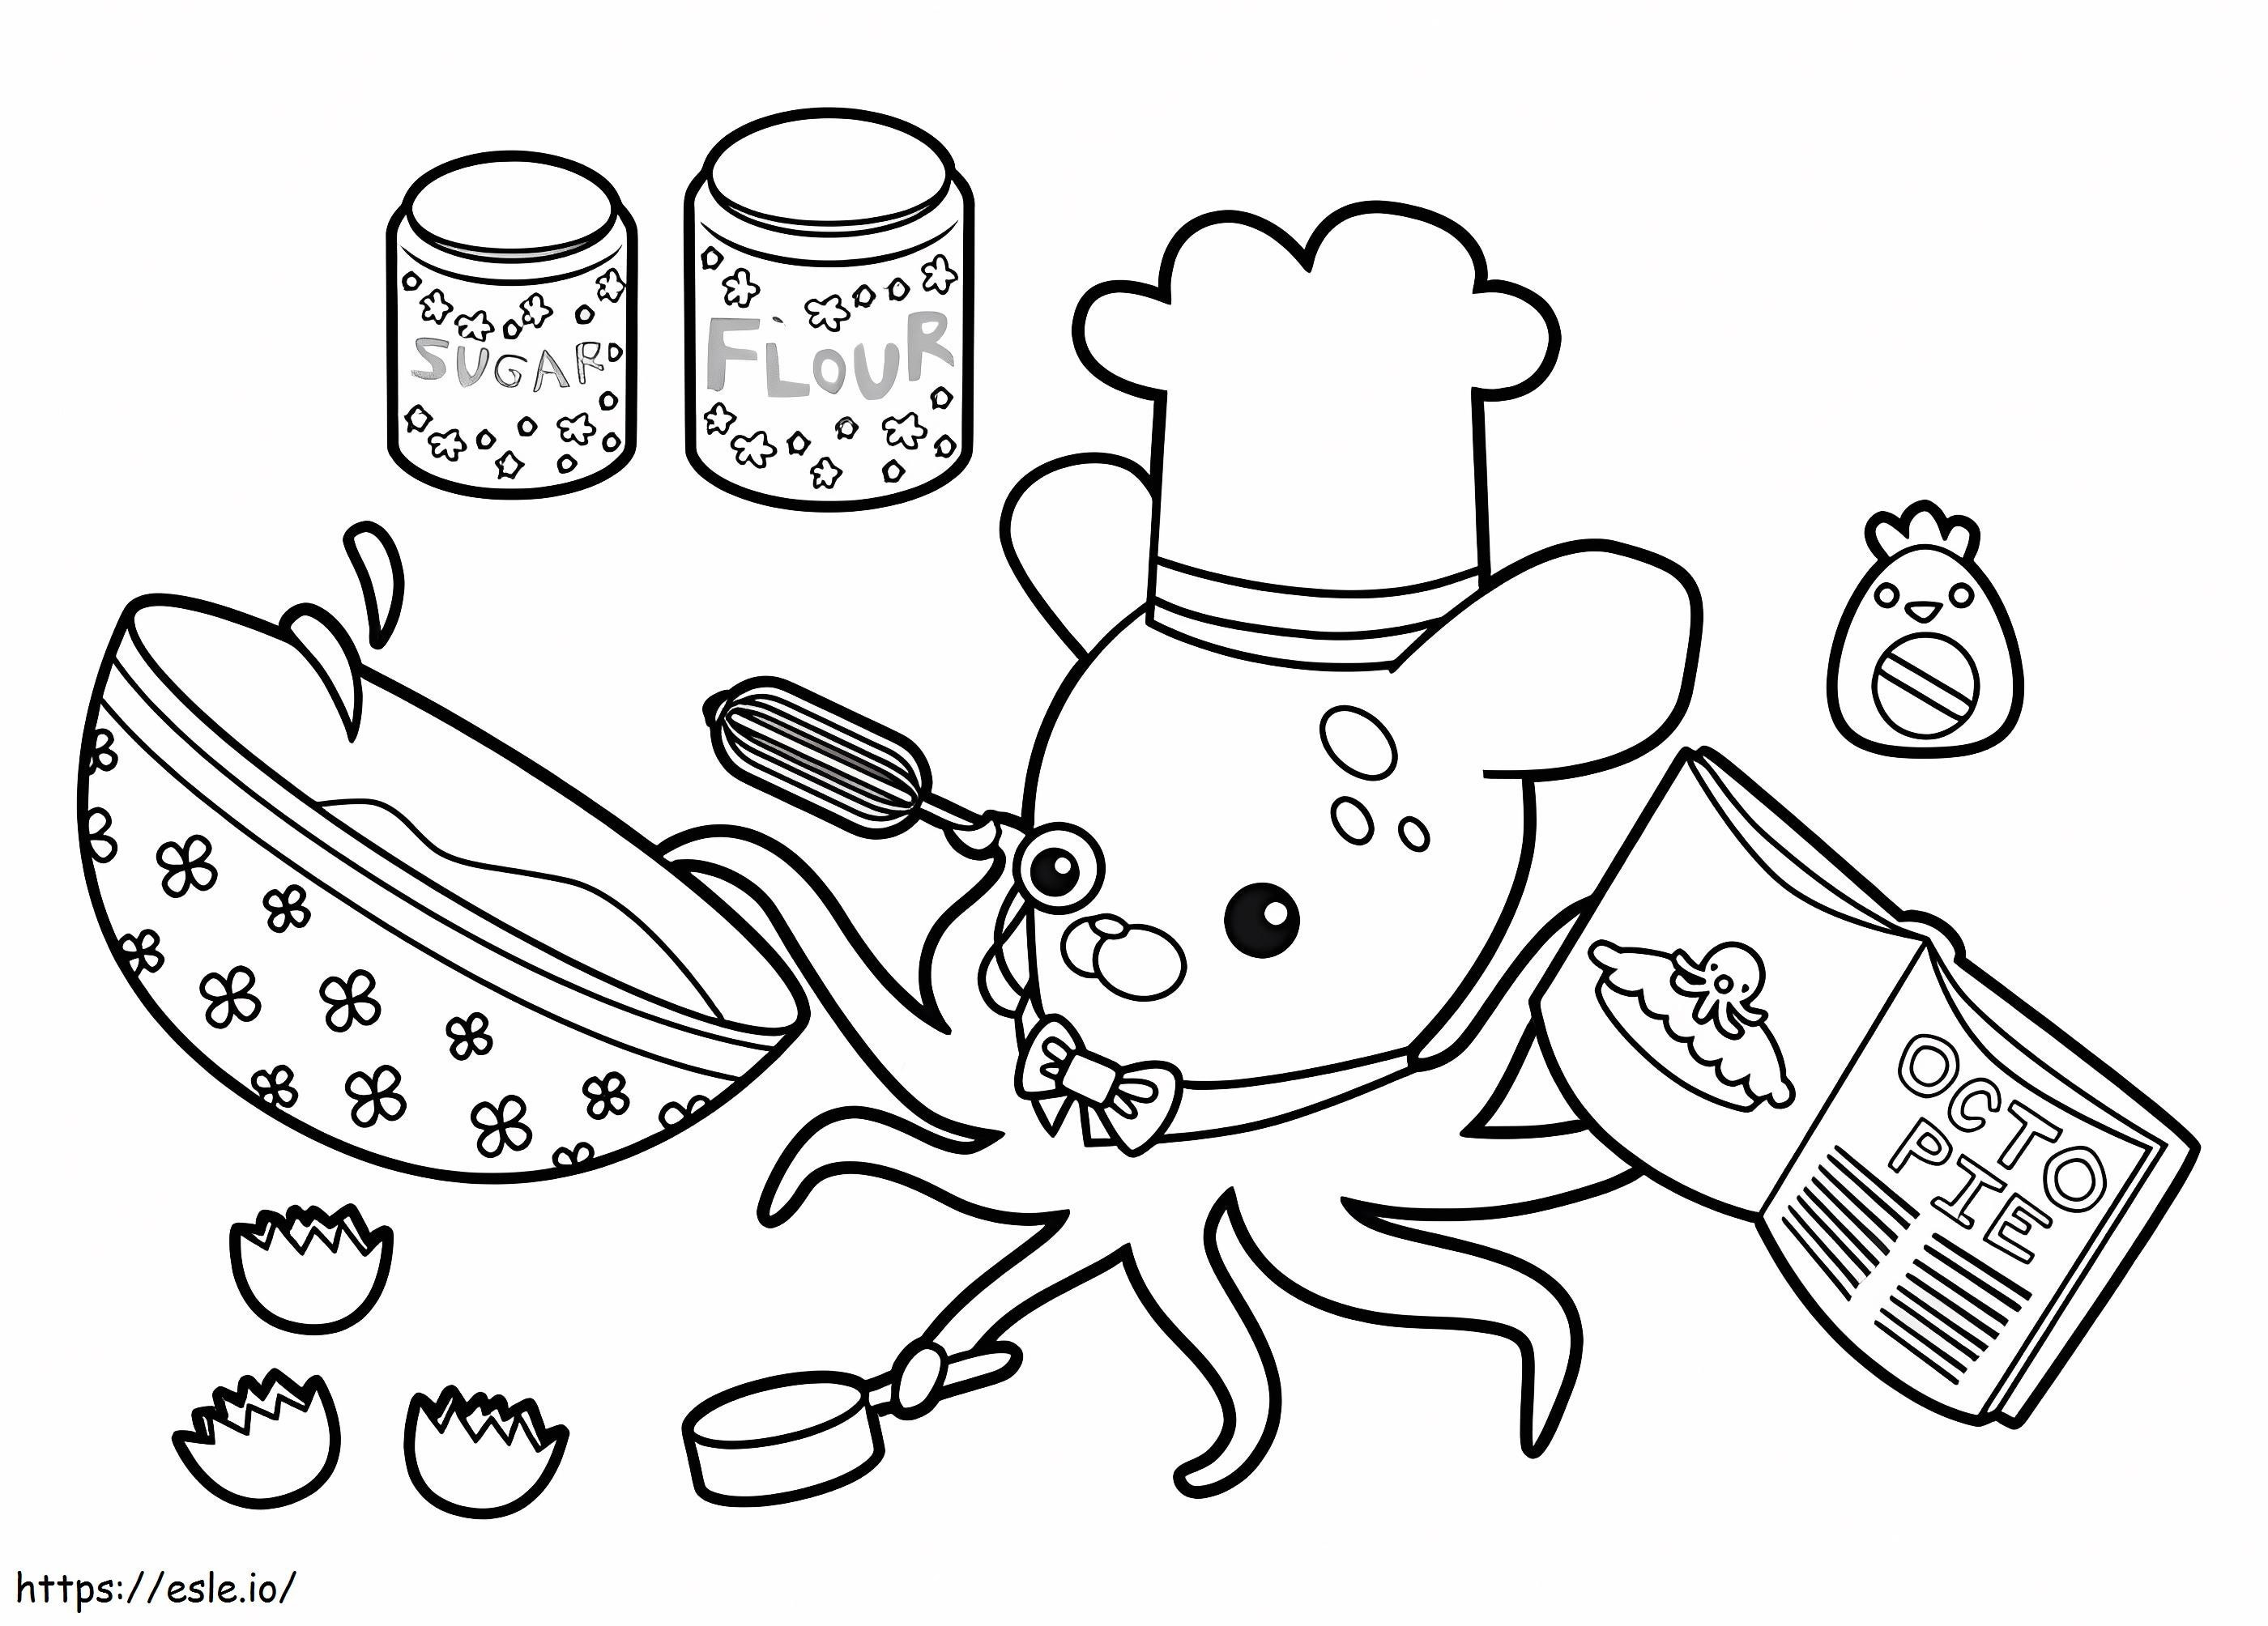 Cooking With Professor Inkling coloring page